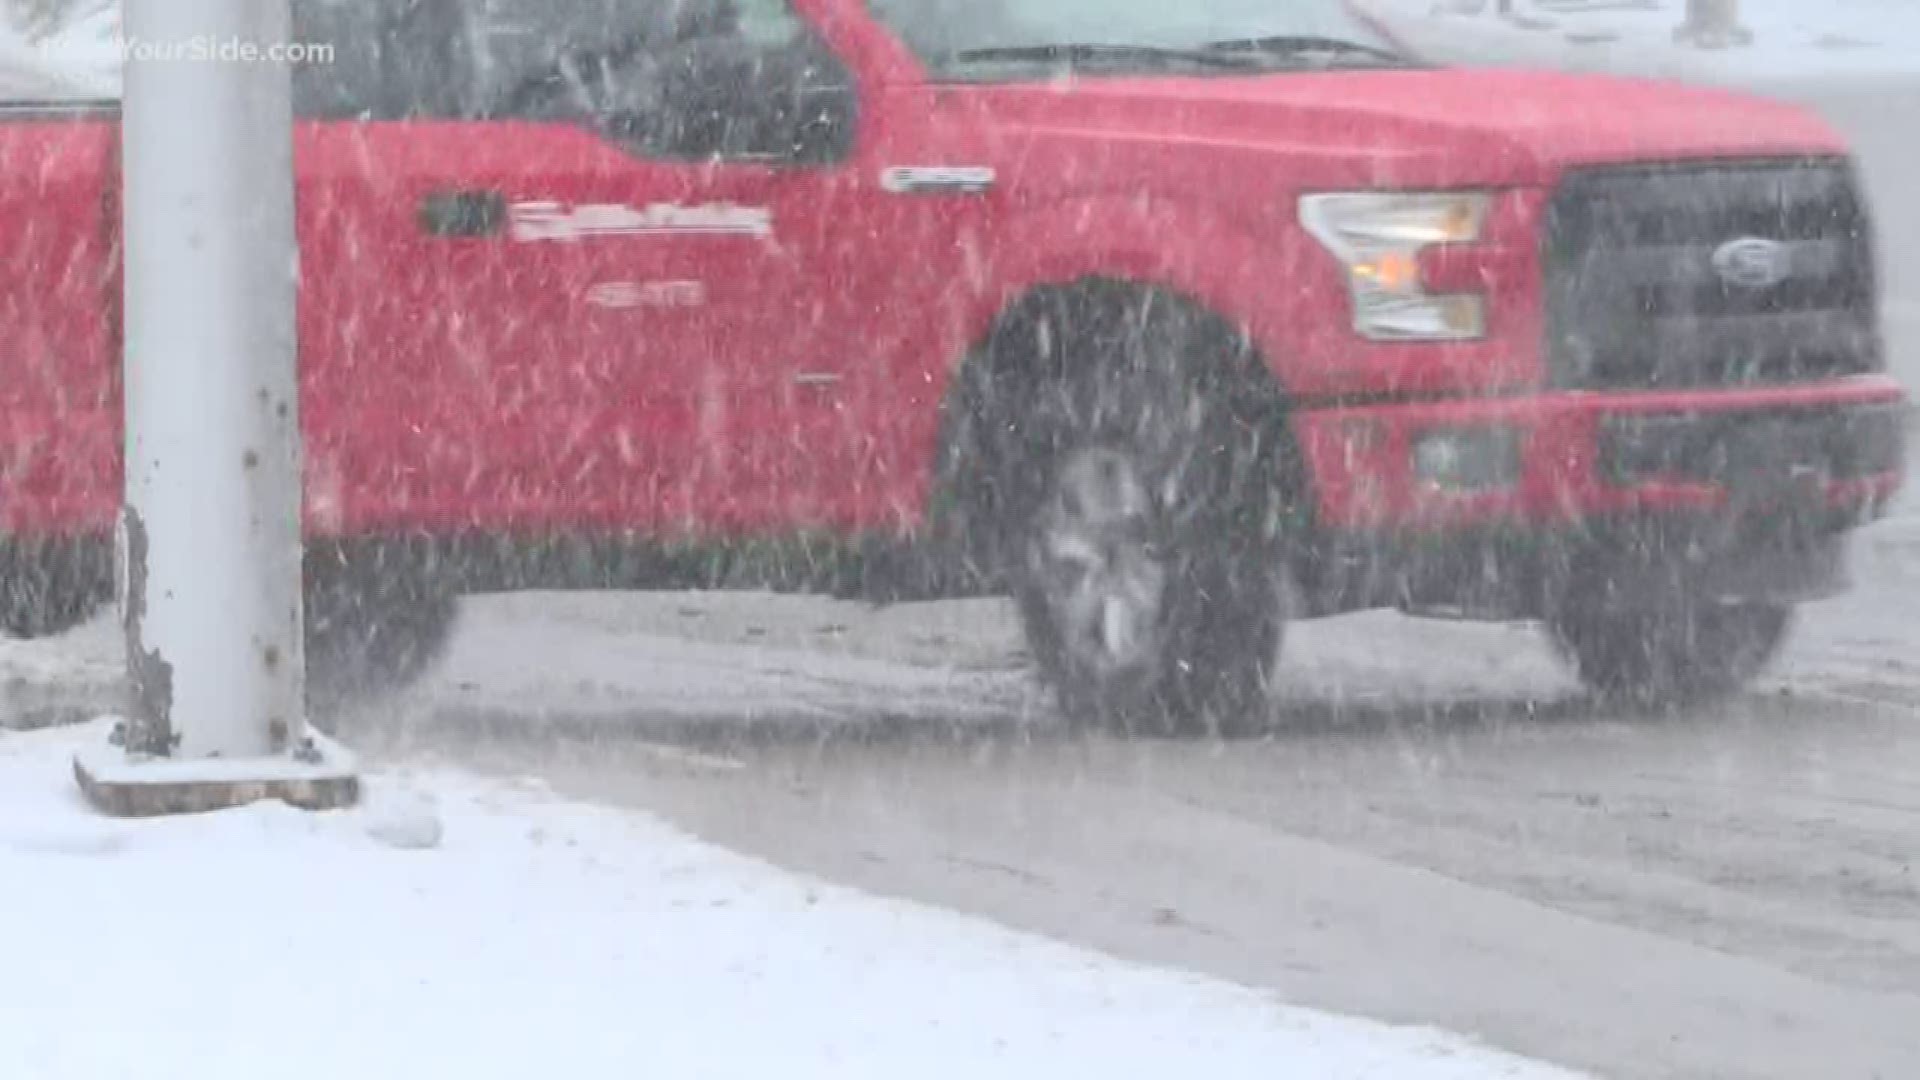 The first significant snowfall of the season hit West Michigan on Monday, and with it came slick roads and accidents.